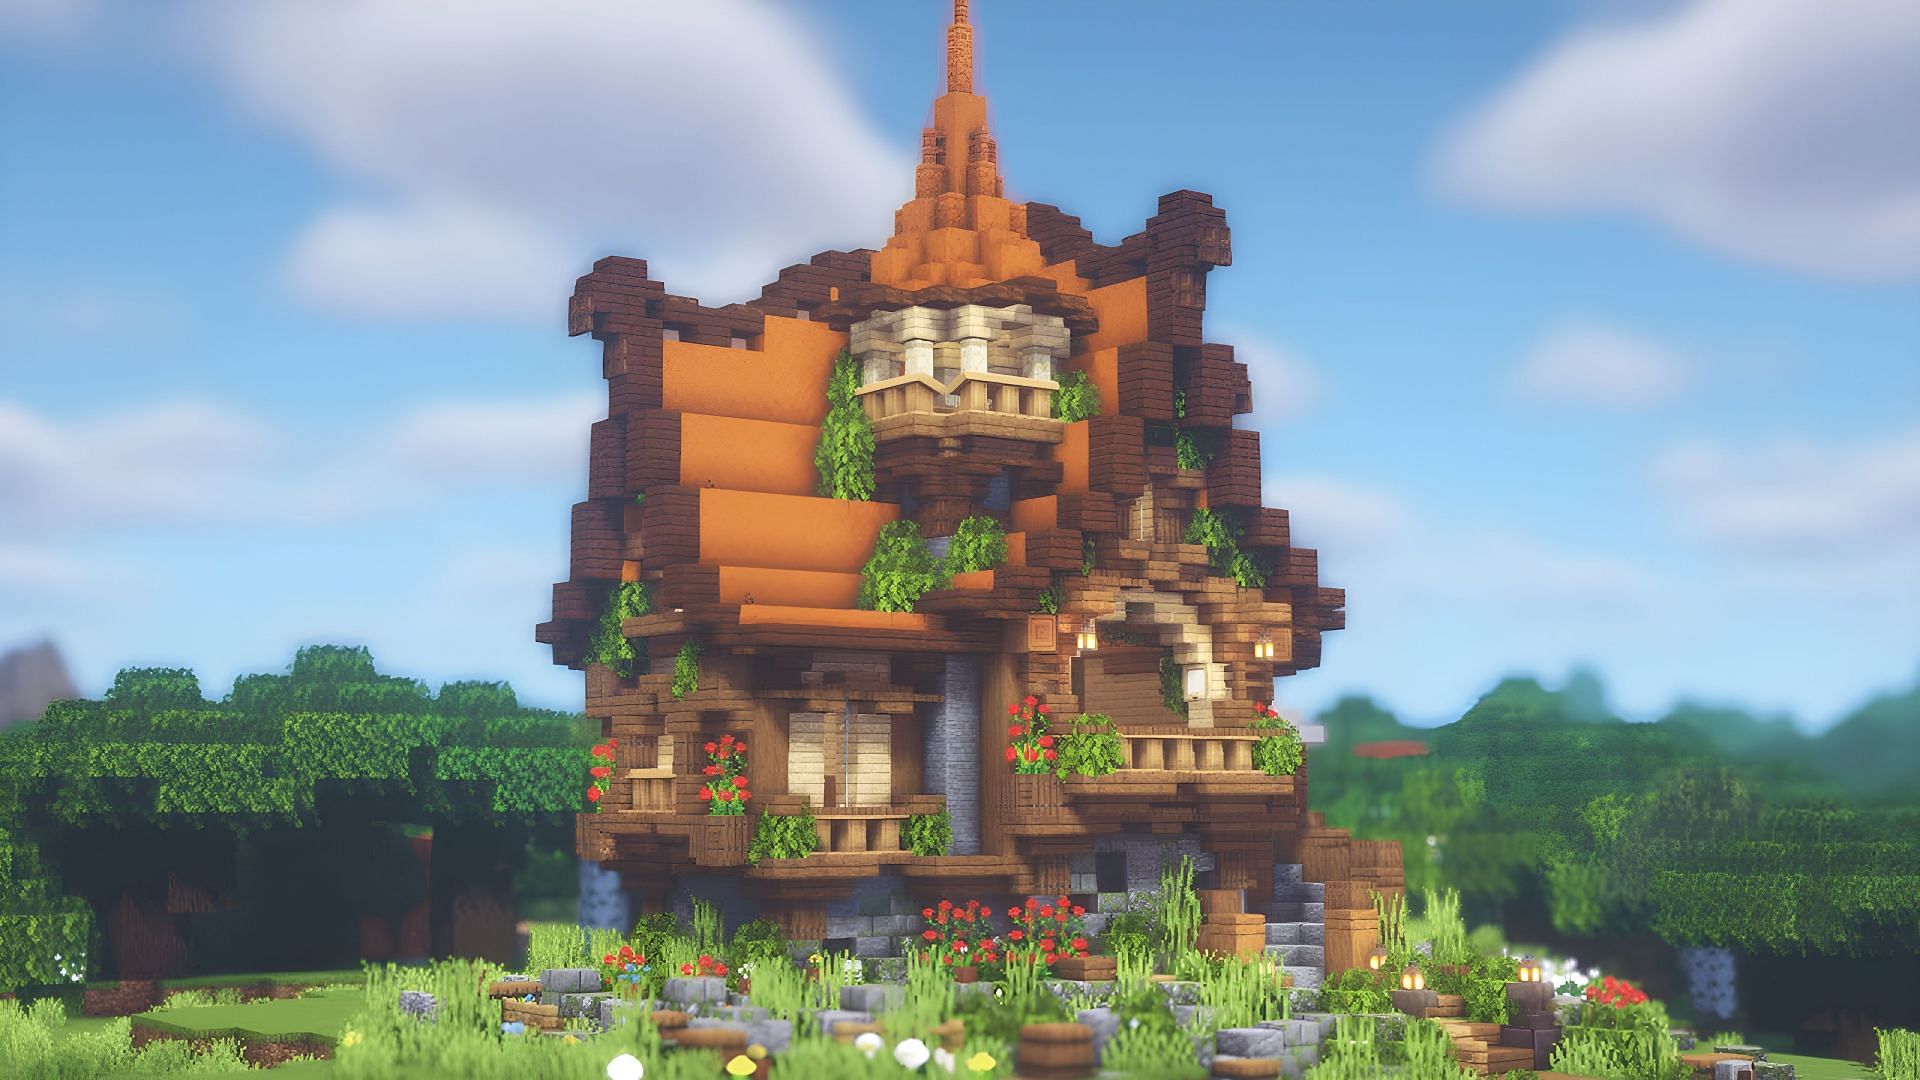 Fantasy style builds are incredibly popular (Image via YouTube, MC Fantasy Builds)